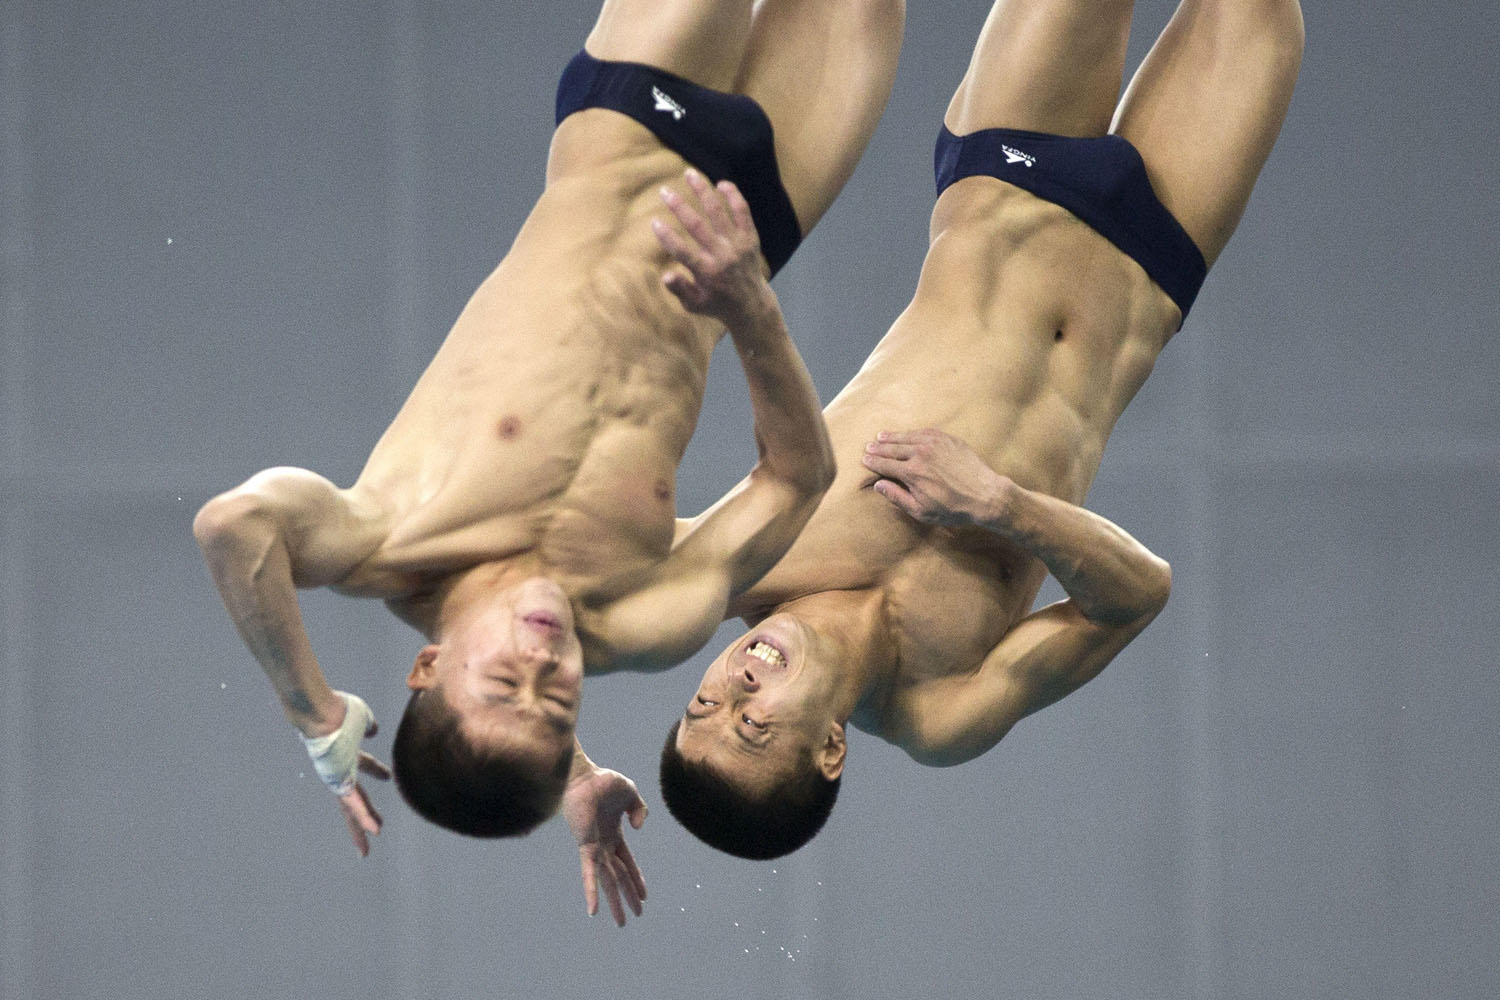 Oct. 7, 2013. North Korea's Kim Sun Bom and So Myong Hyok compete in the final of the men's 10-meter synchronized platform diving event at the sixth East Asian Games in Tianjin, China.